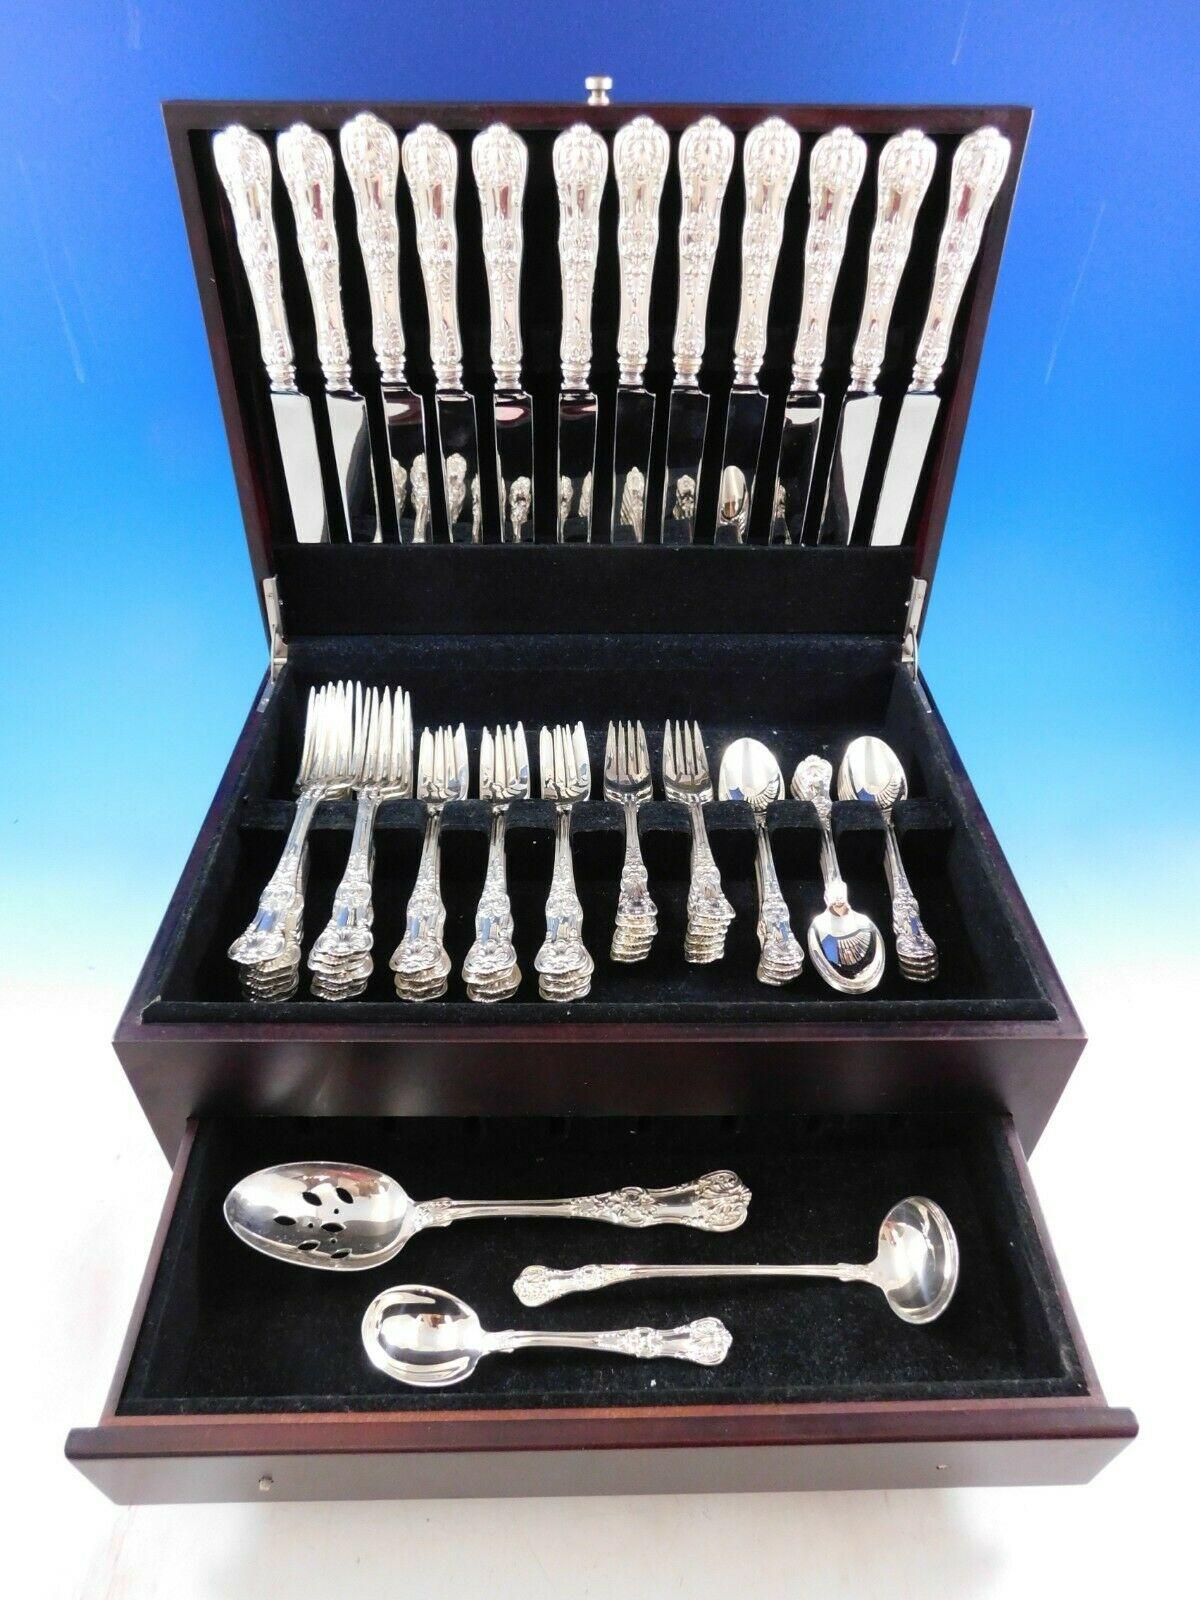 ENGLISH KING (c. 1885)

Patterns similar to our English King were first used in France and England late in the eighteenth century and have remained among the most popular styles for>flatware today, in both Europe and America. Tiffany & Co. first